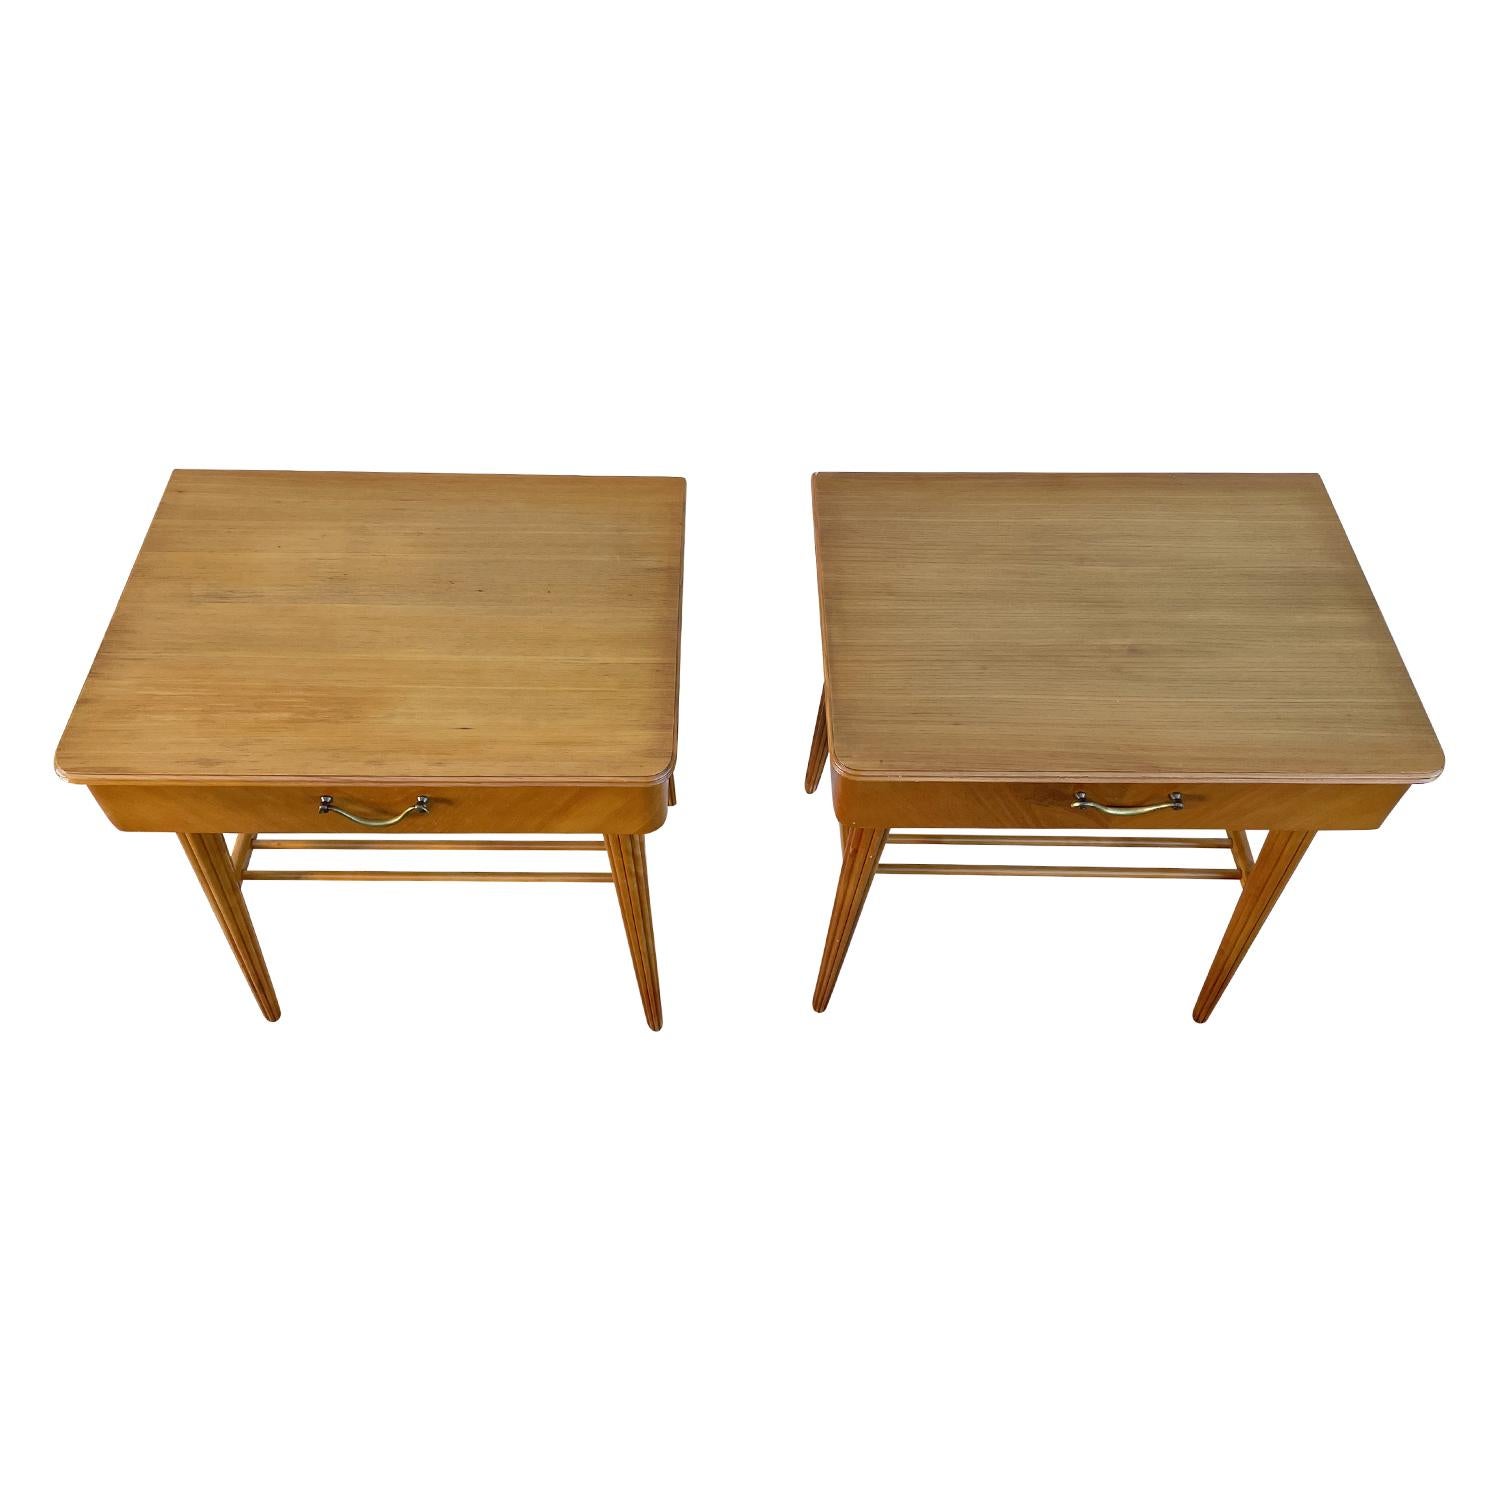 20th Century Danish Pair of Birchwood Nightstands - Vintage Brass Bedside Tables In Good Condition For Sale In West Palm Beach, FL